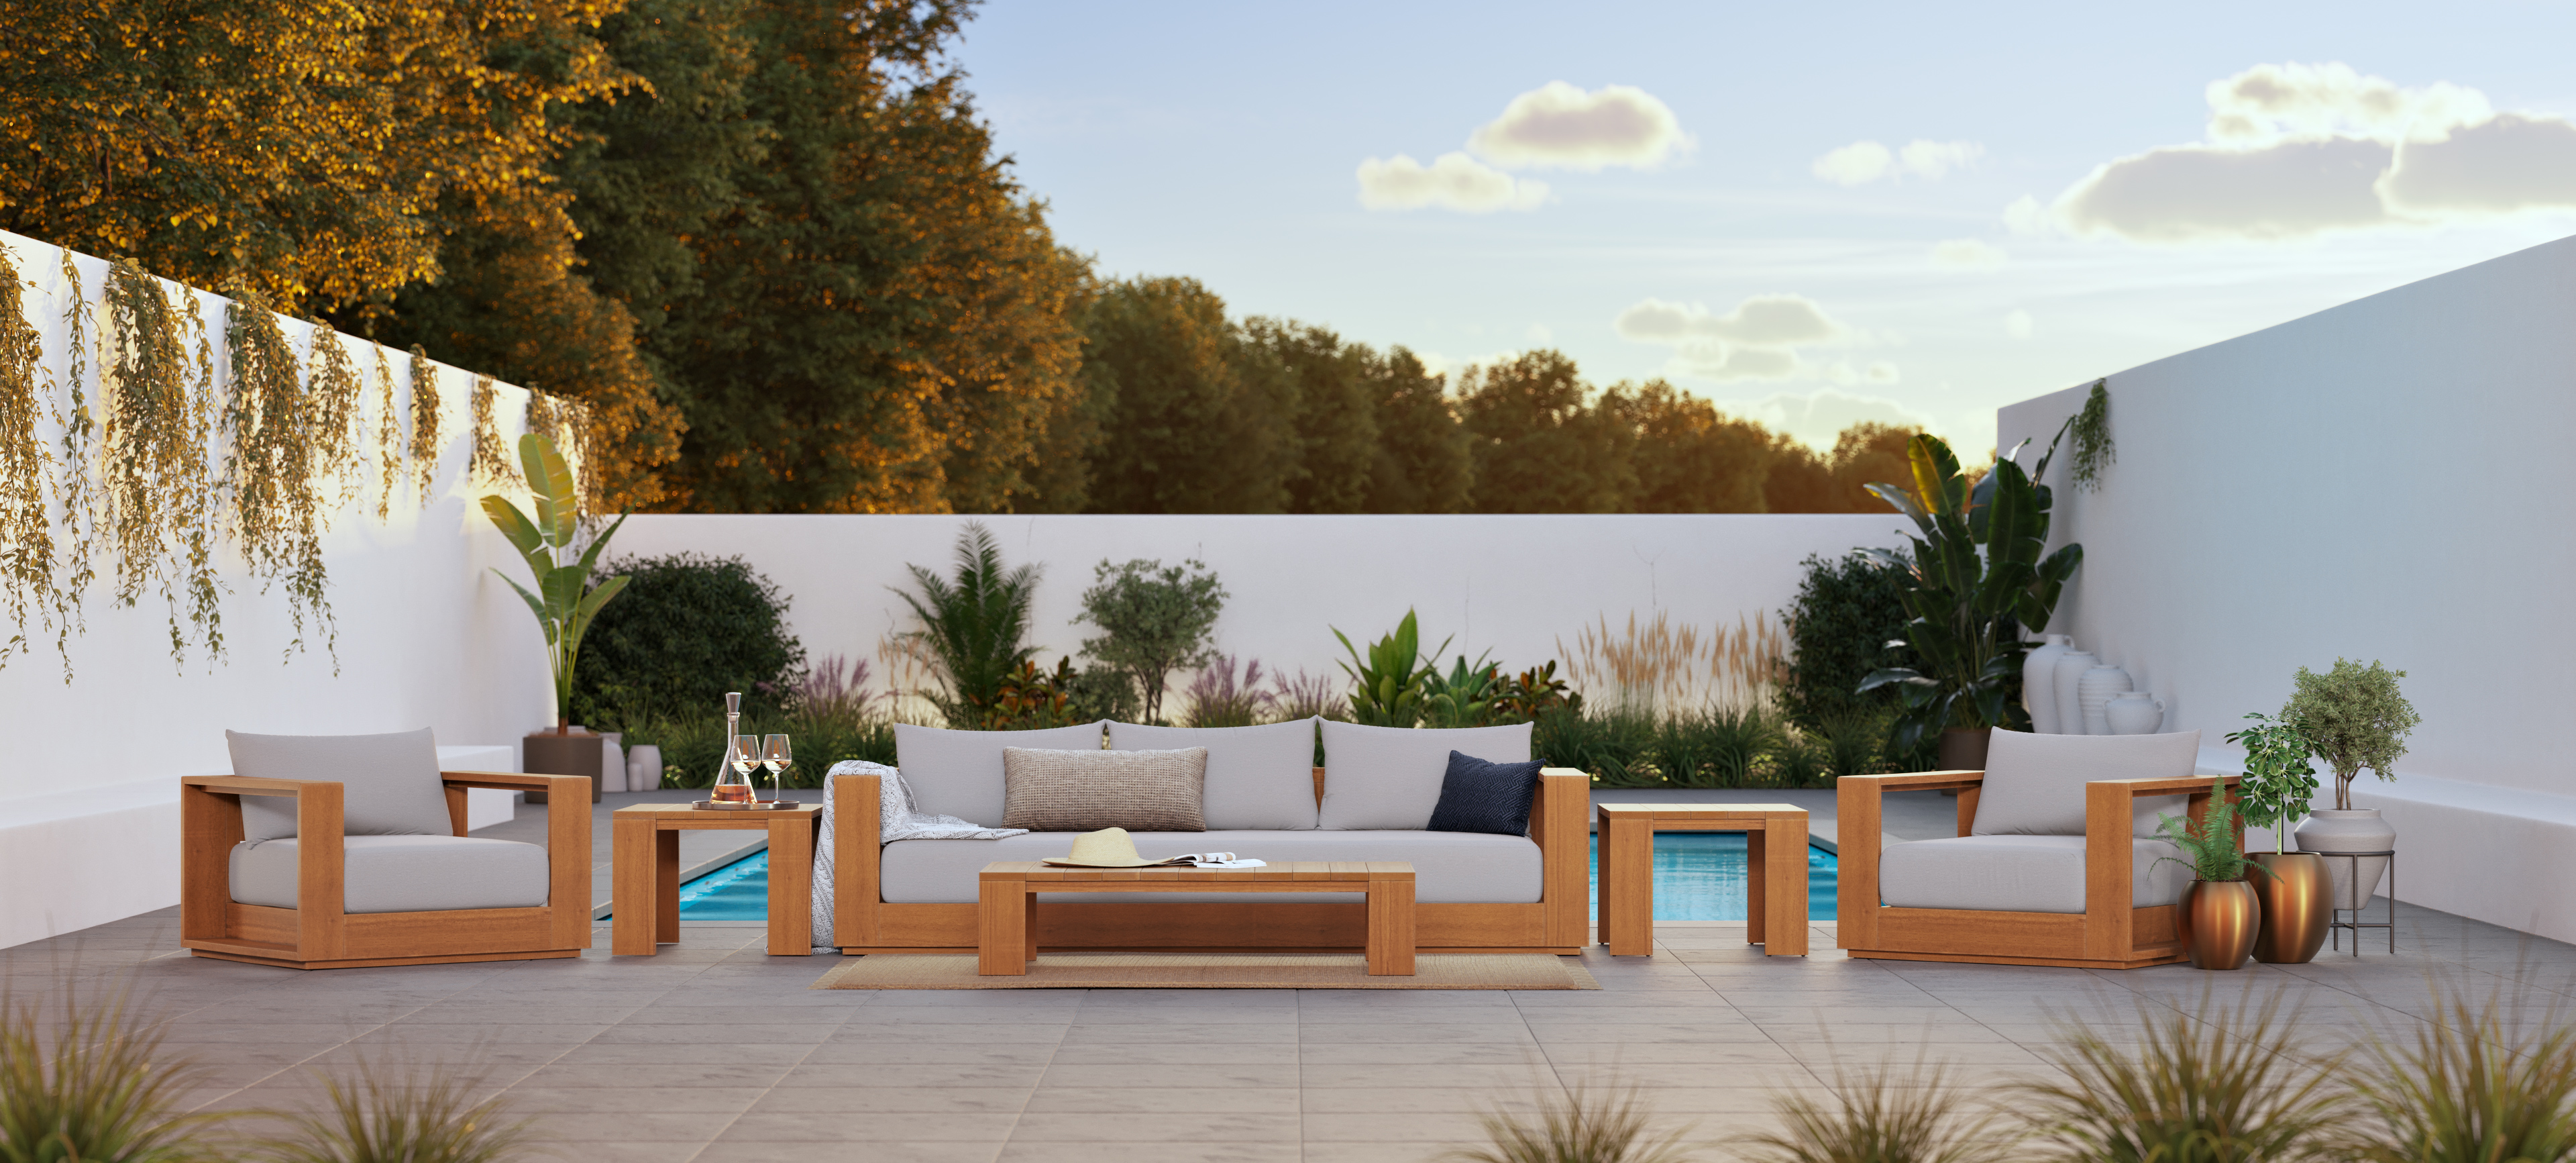 rendering 3d visualization product realistic 3d corner furtniture outdoor sunset